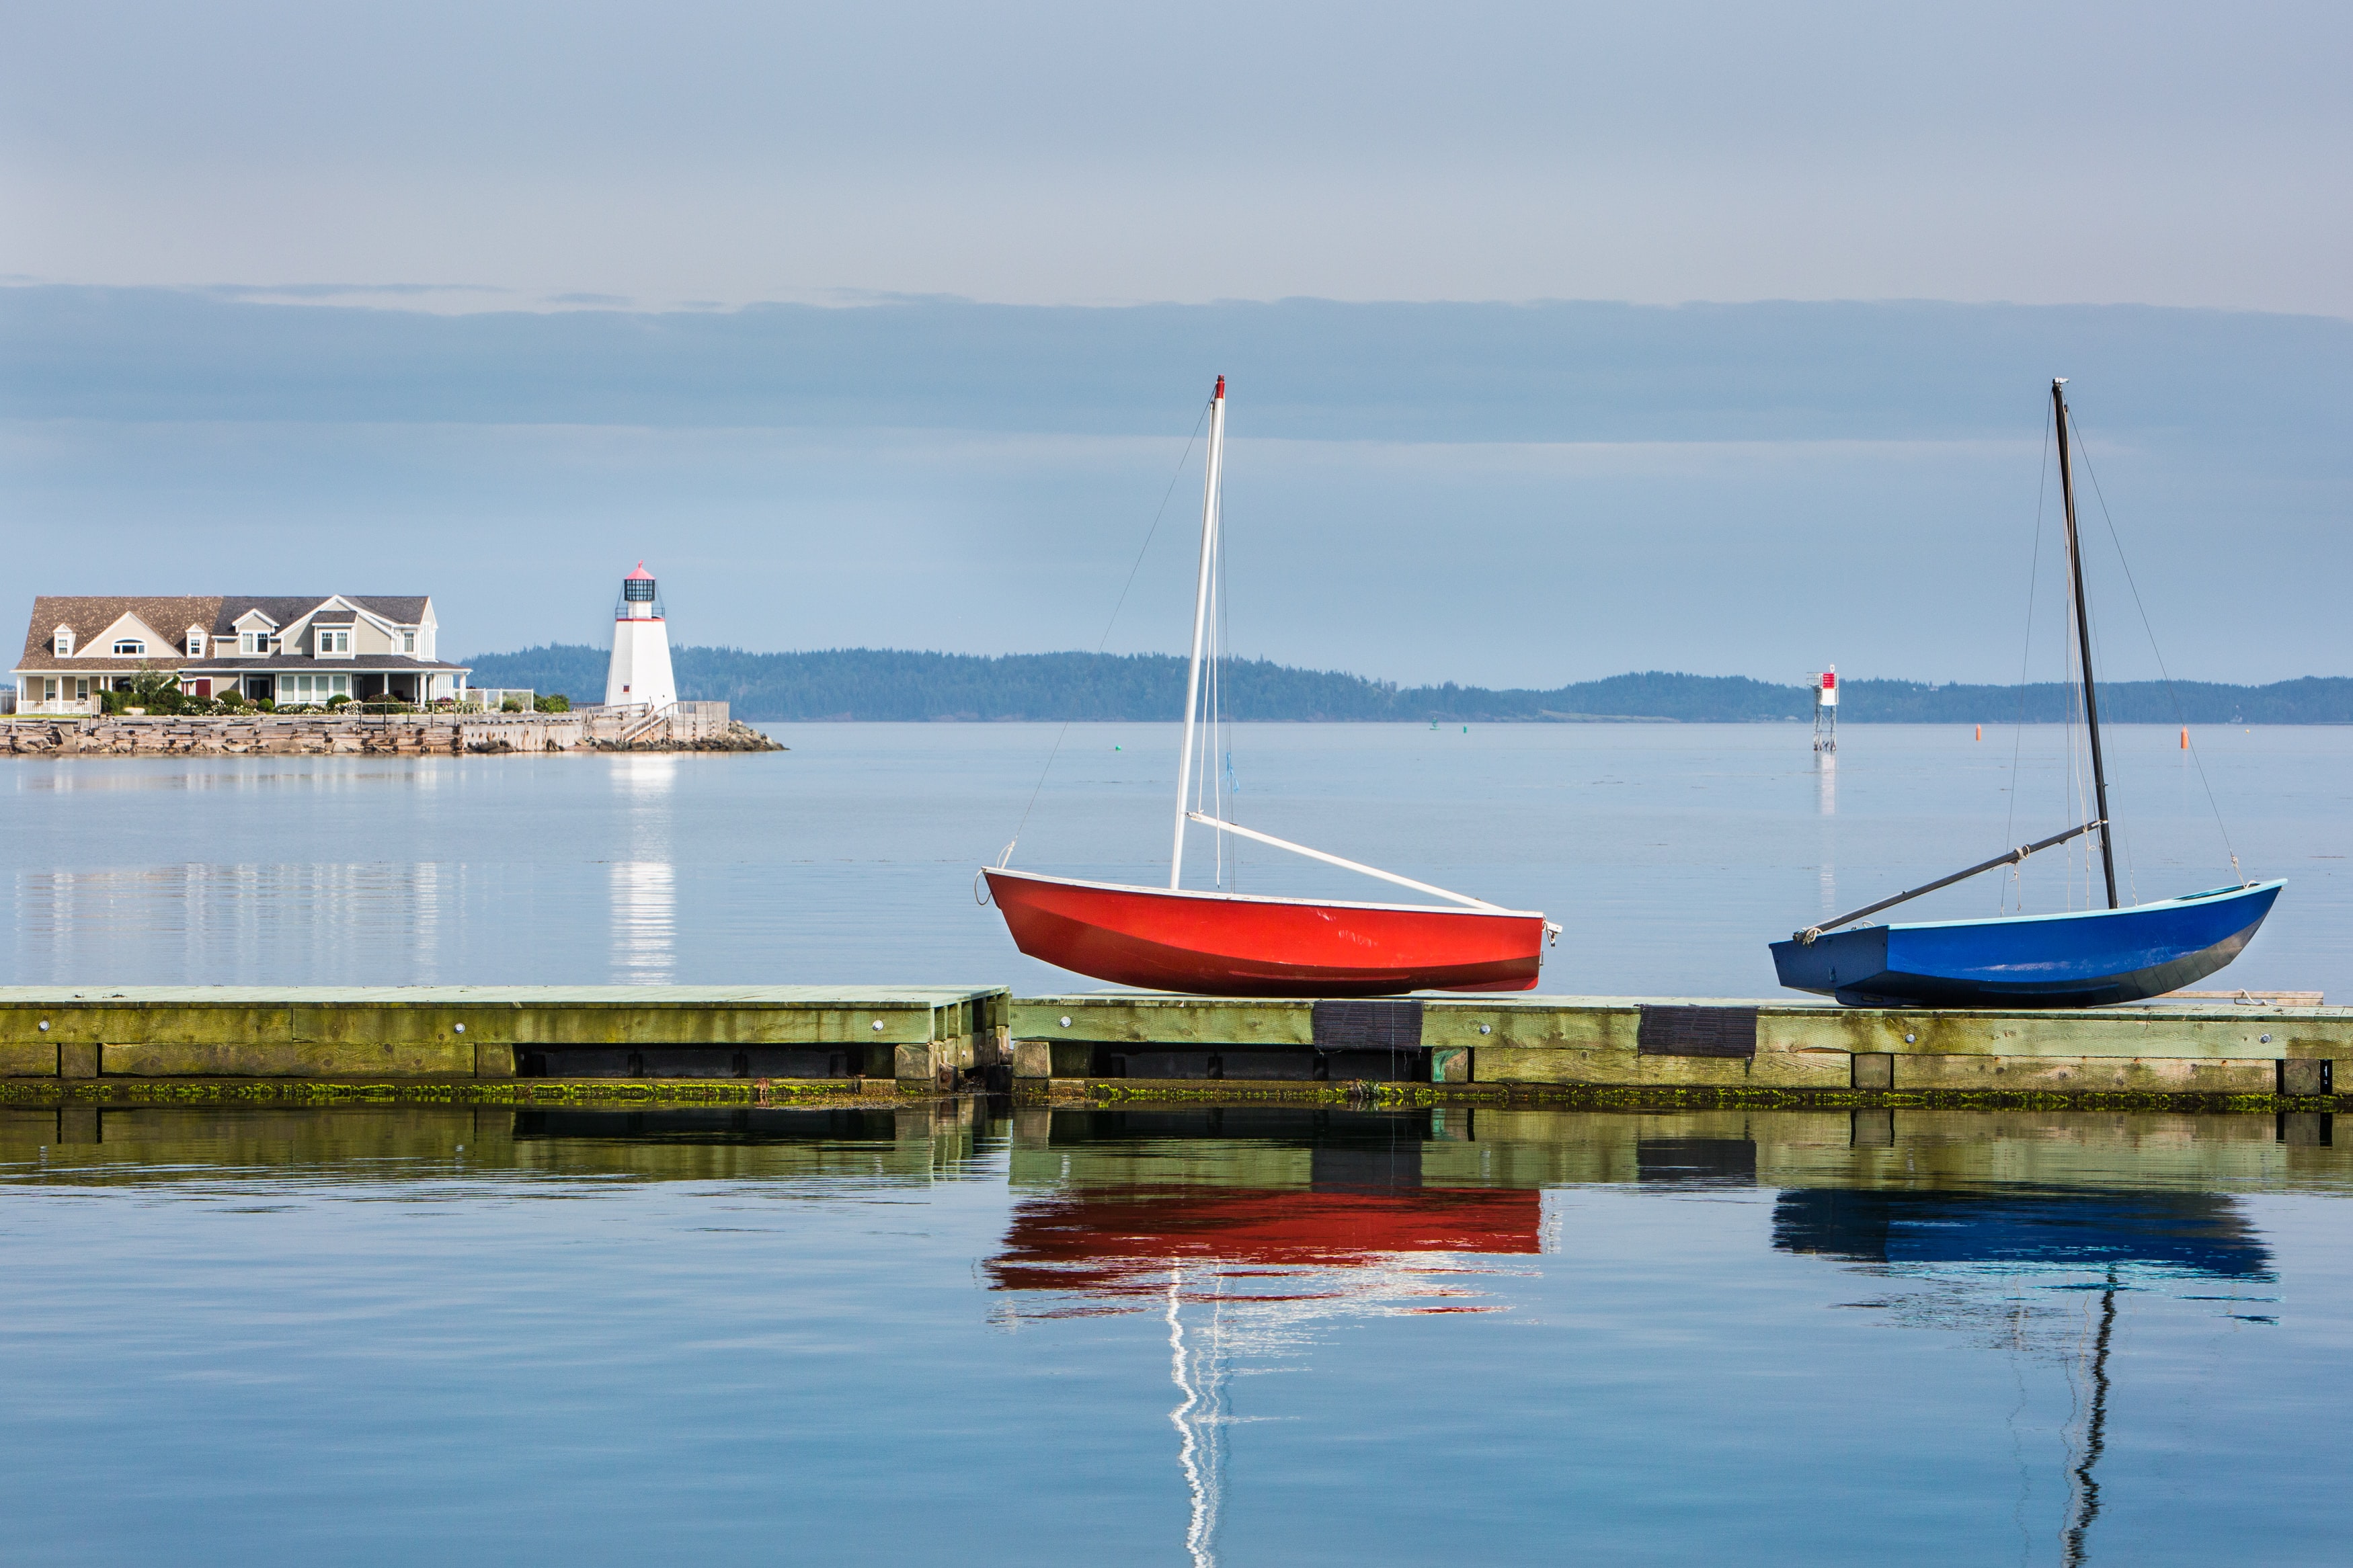 Two colourful boats on the water, A light house and some hills in the background